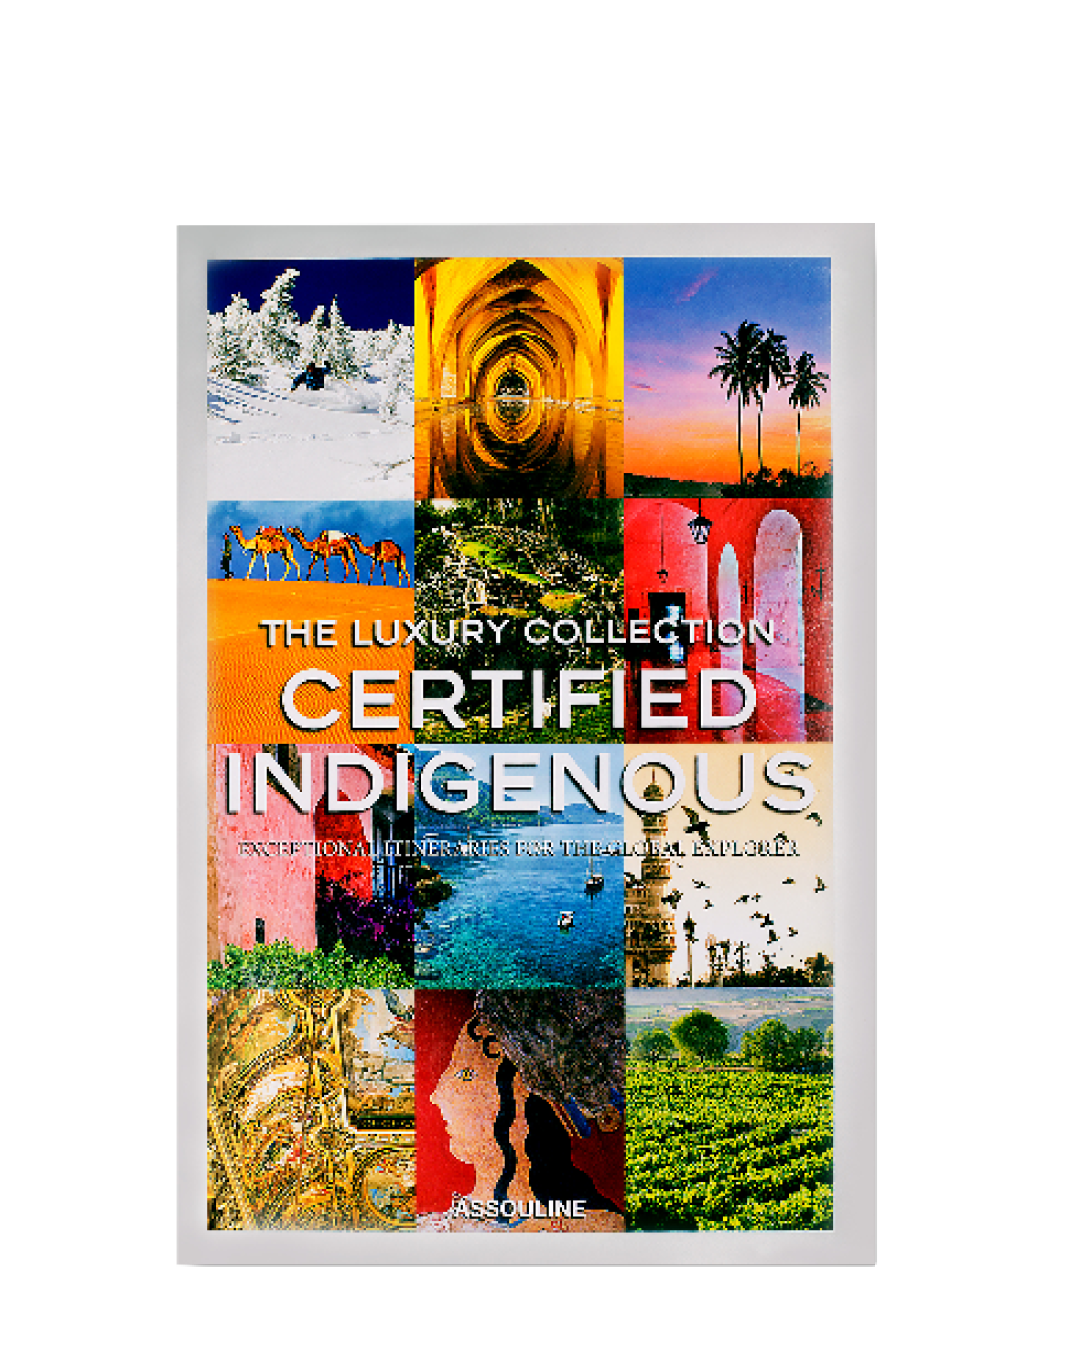 The Luxury Collection Certified Indigenous